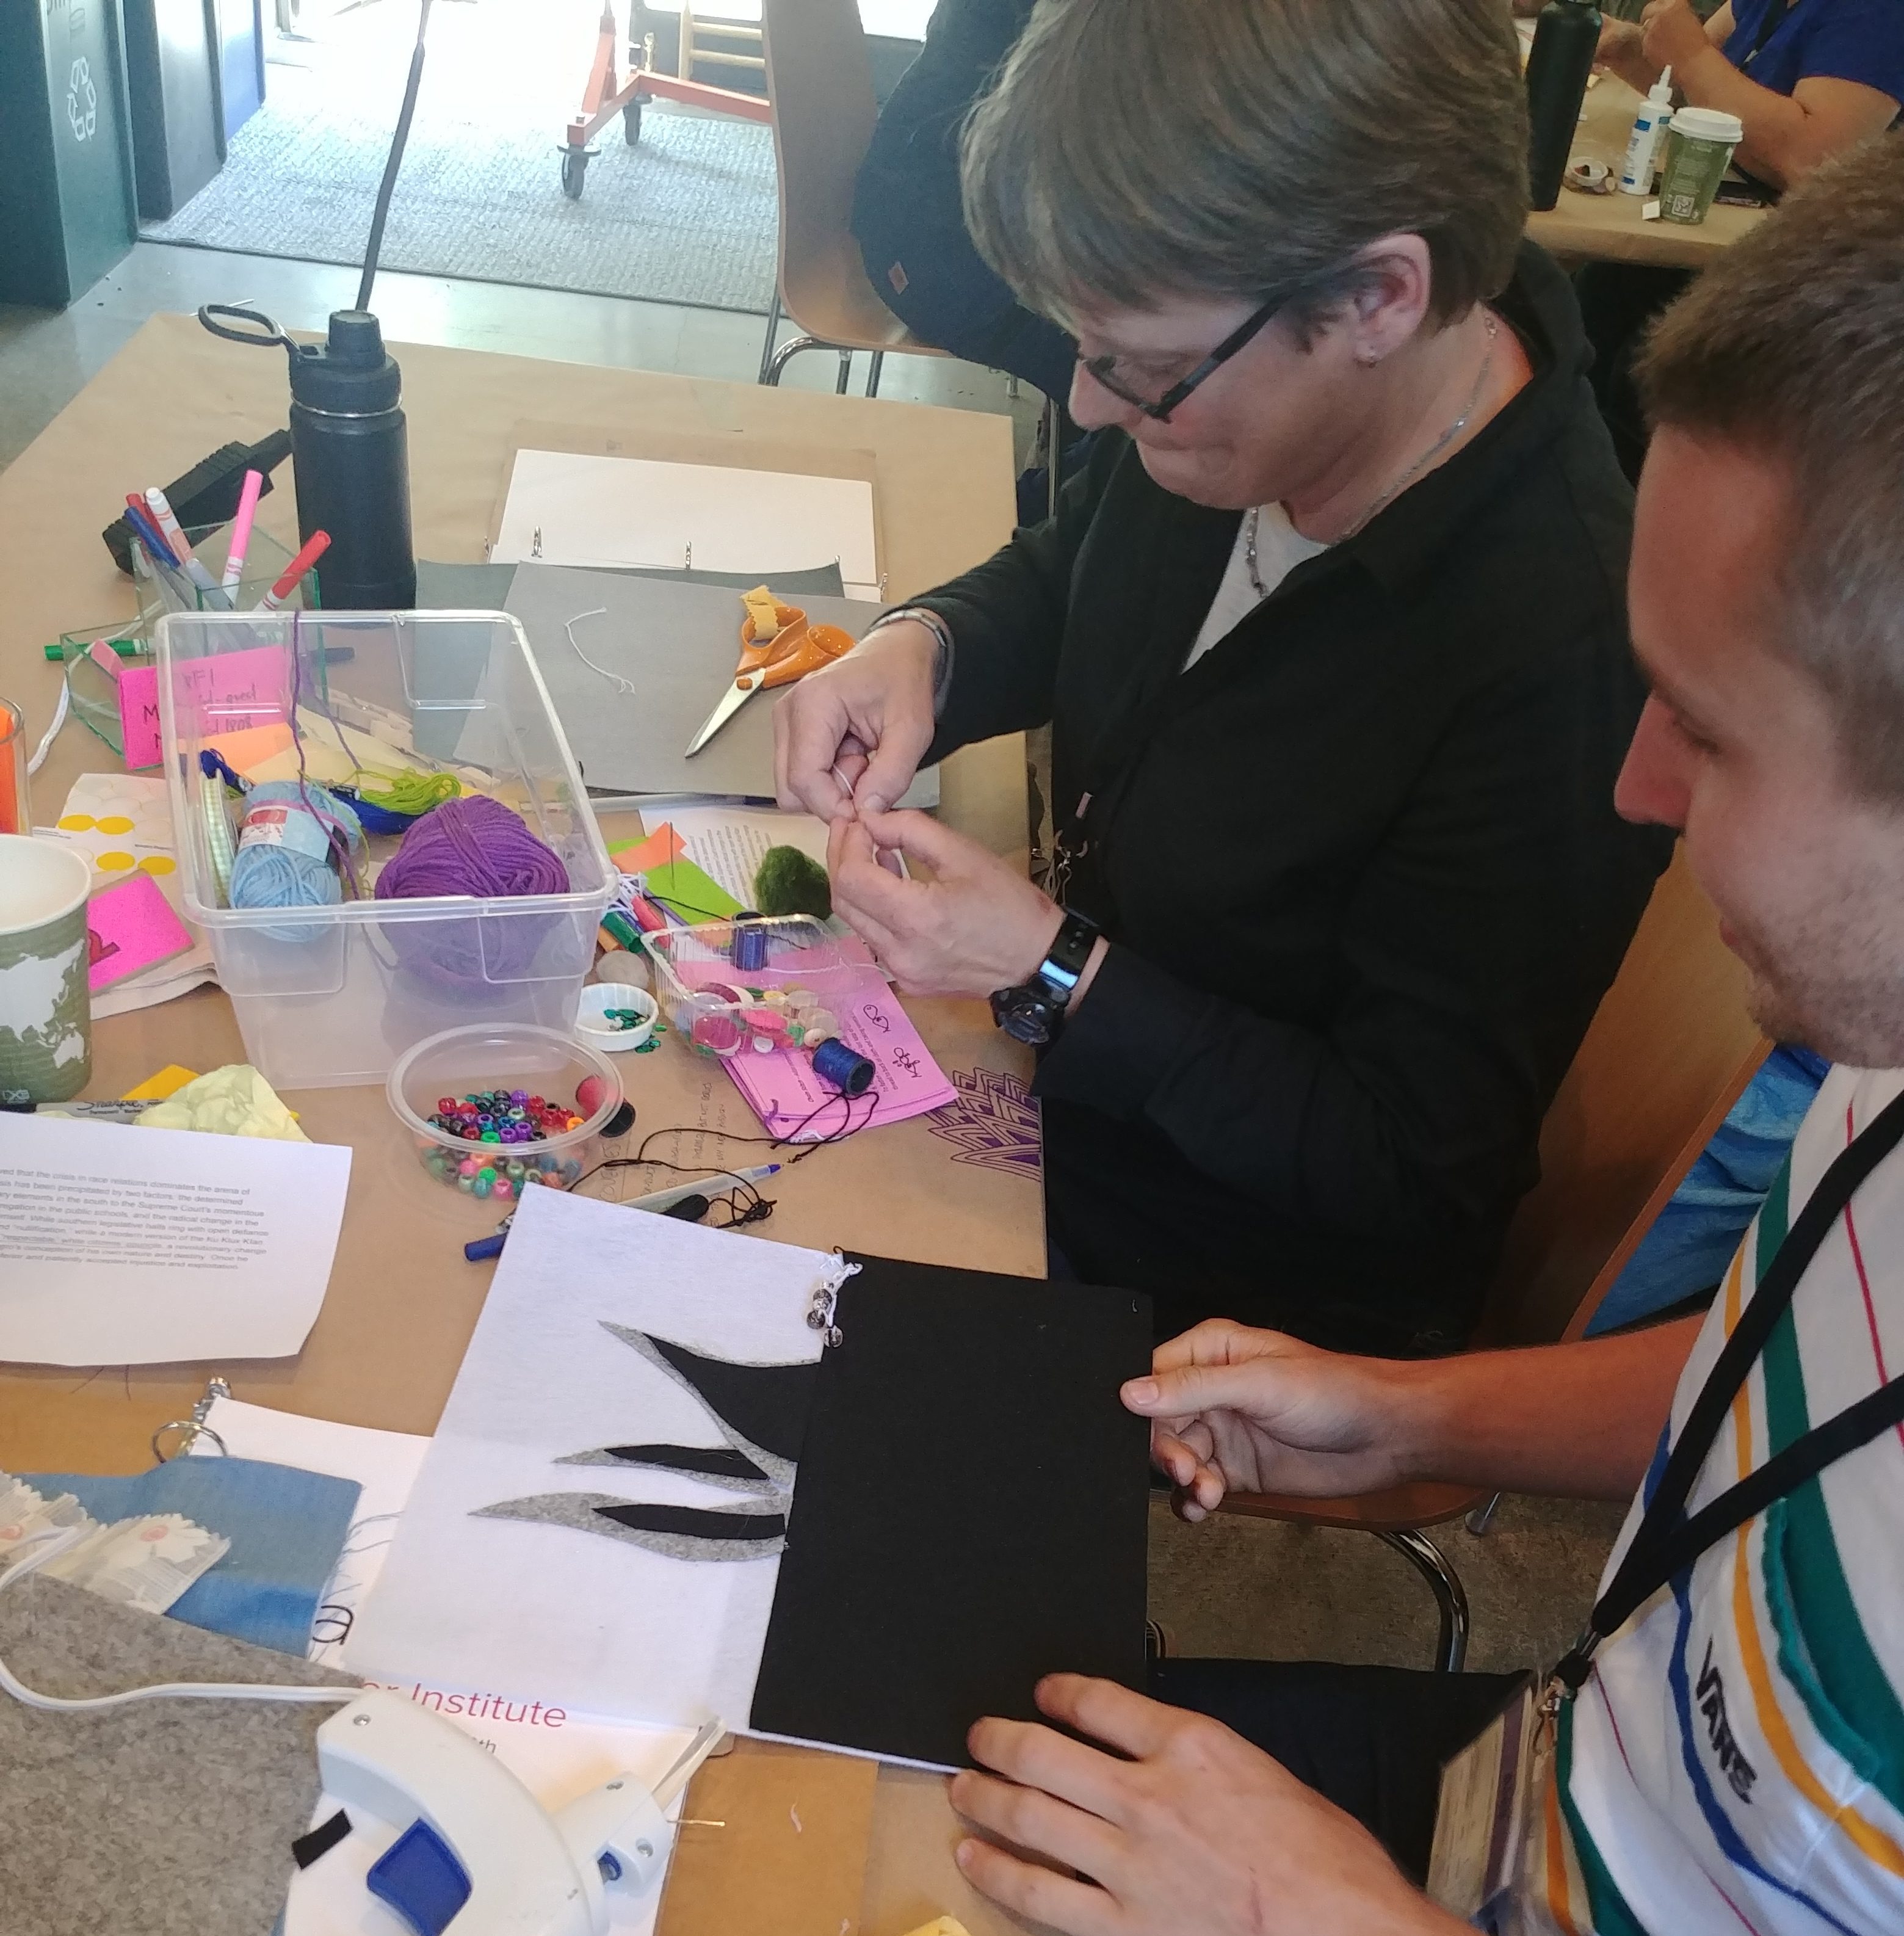 Two educators, a man and a woman, collaborate on a hand-sewn quilt block.